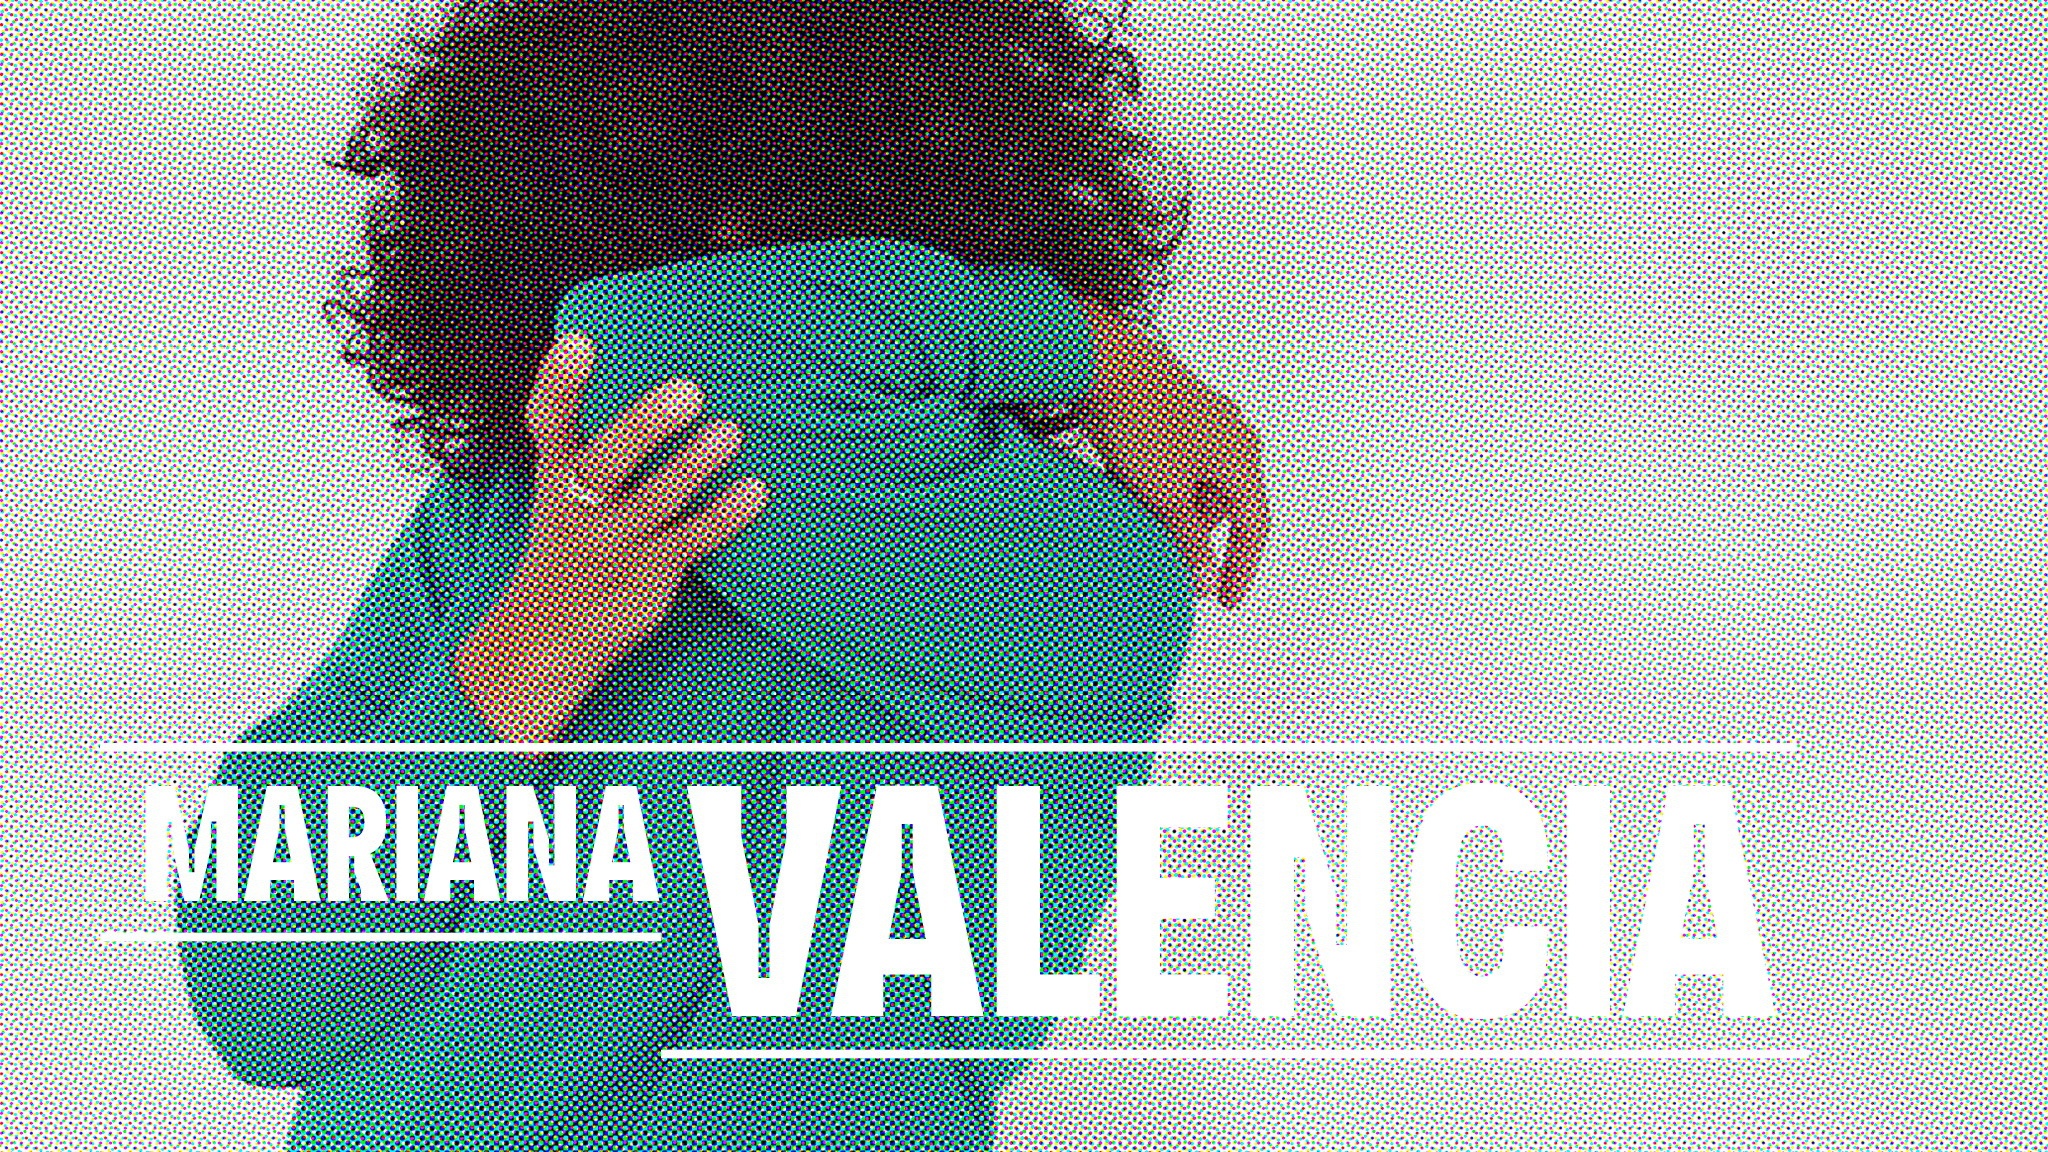 A photo of artist Mariana Valencia in a teal sweatshirt hiding their face behind their arm and elbow with the name Mariana Valencia superimposed in white type